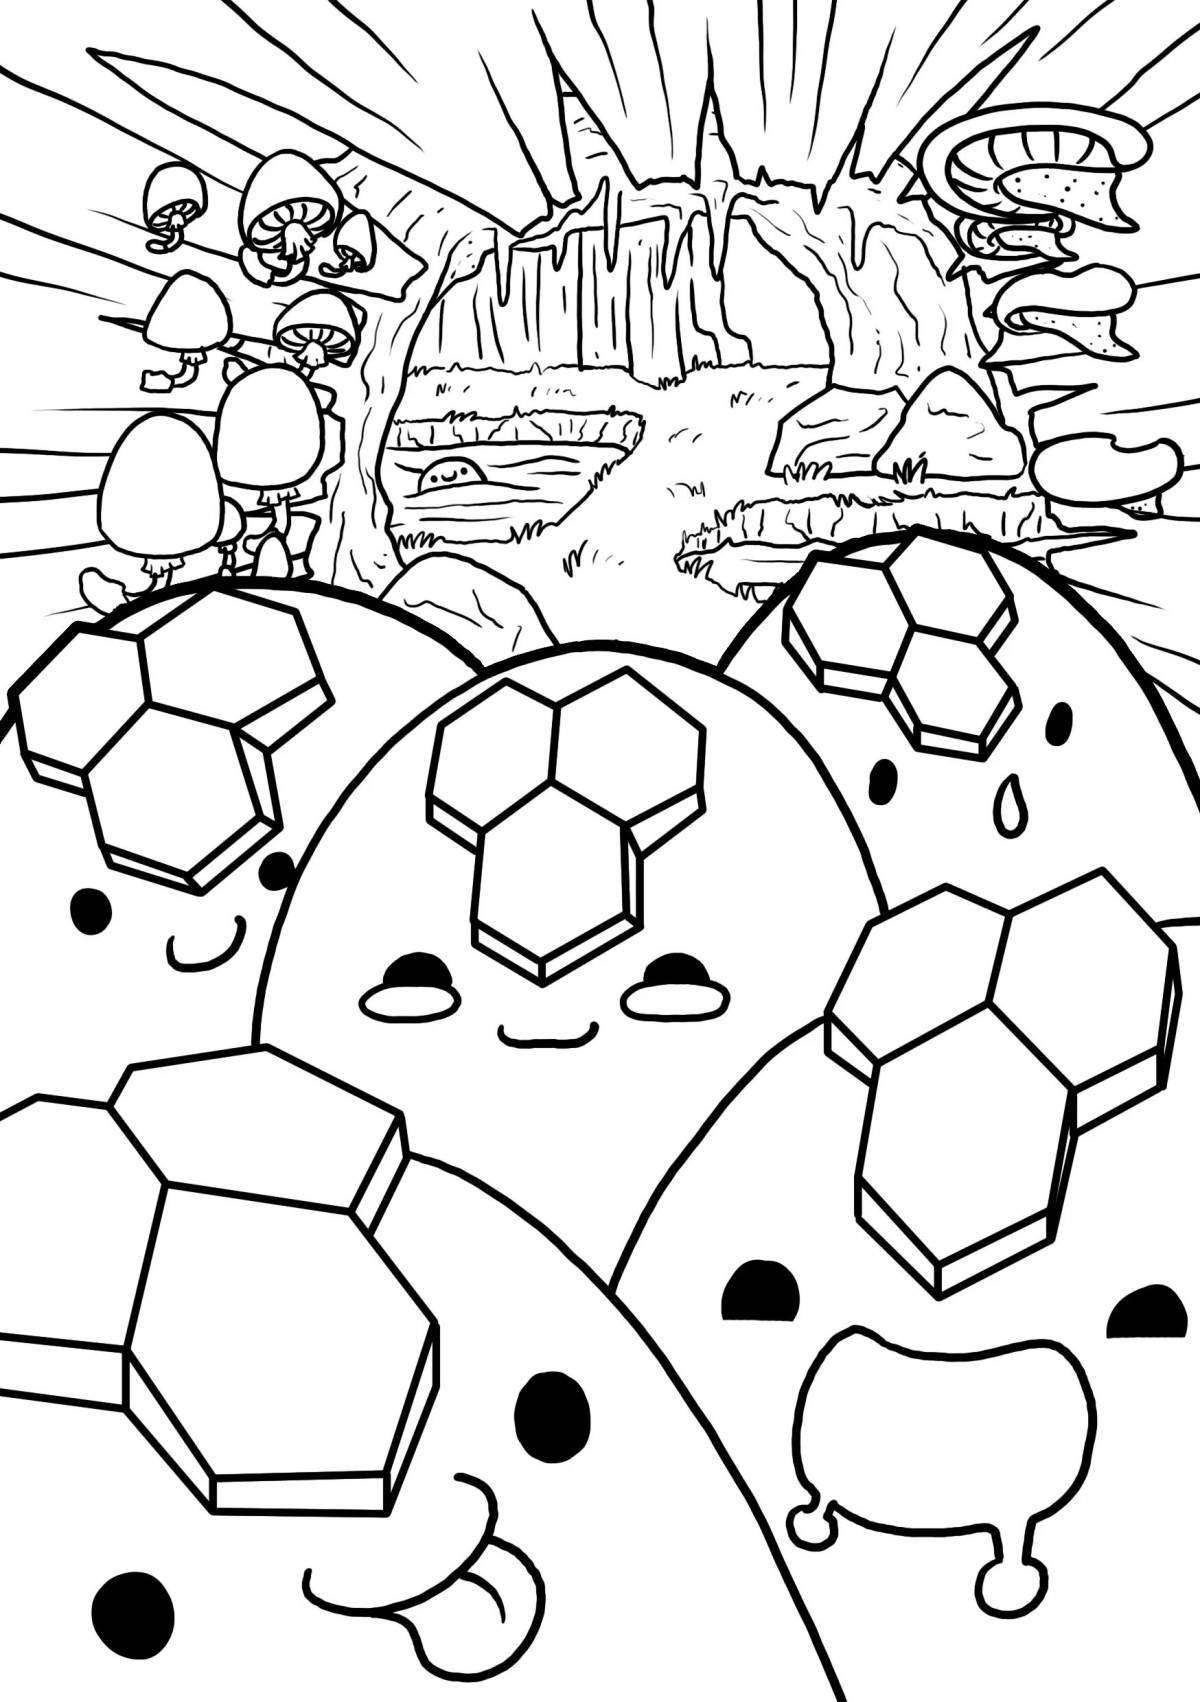 Playful slime coloring page for kids